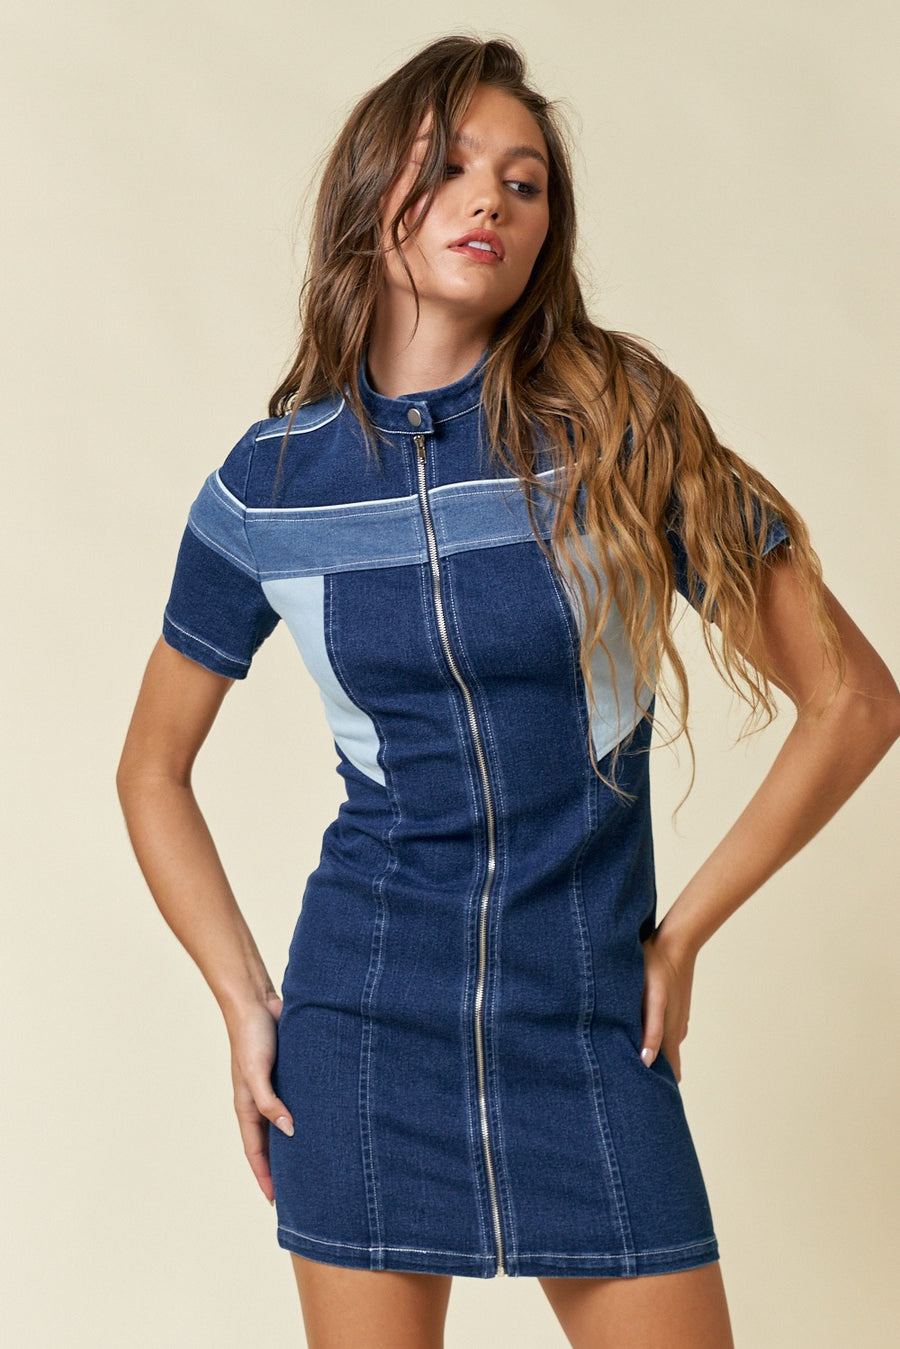 Featuring a moto style denim dress with color blocking and a front zipper.